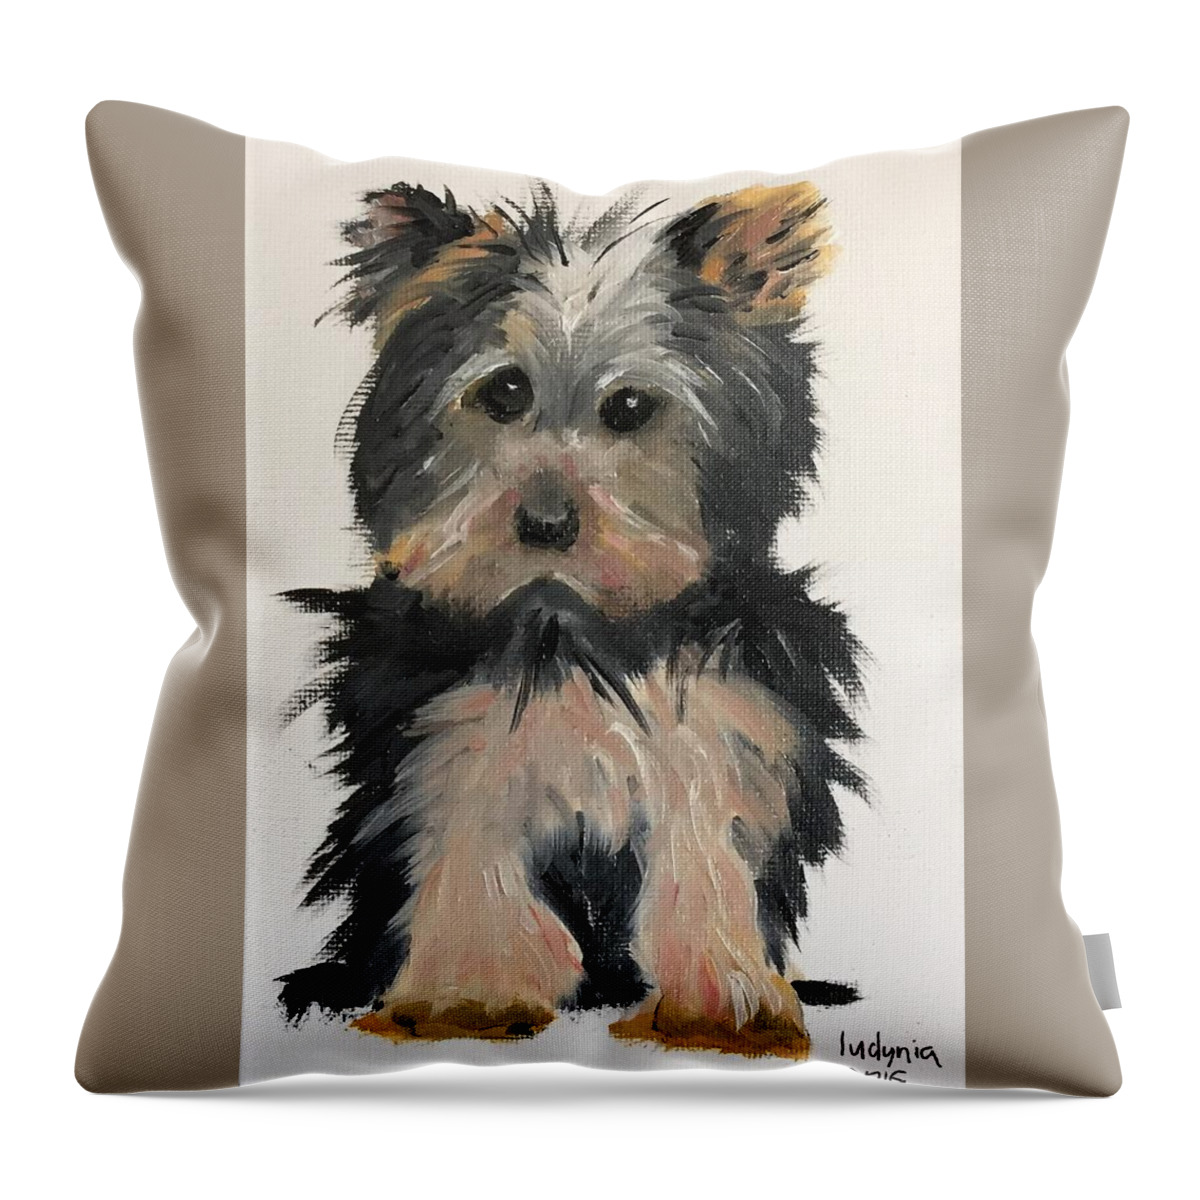 Dog Throw Pillow featuring the painting Puppy by Ryszard Ludynia